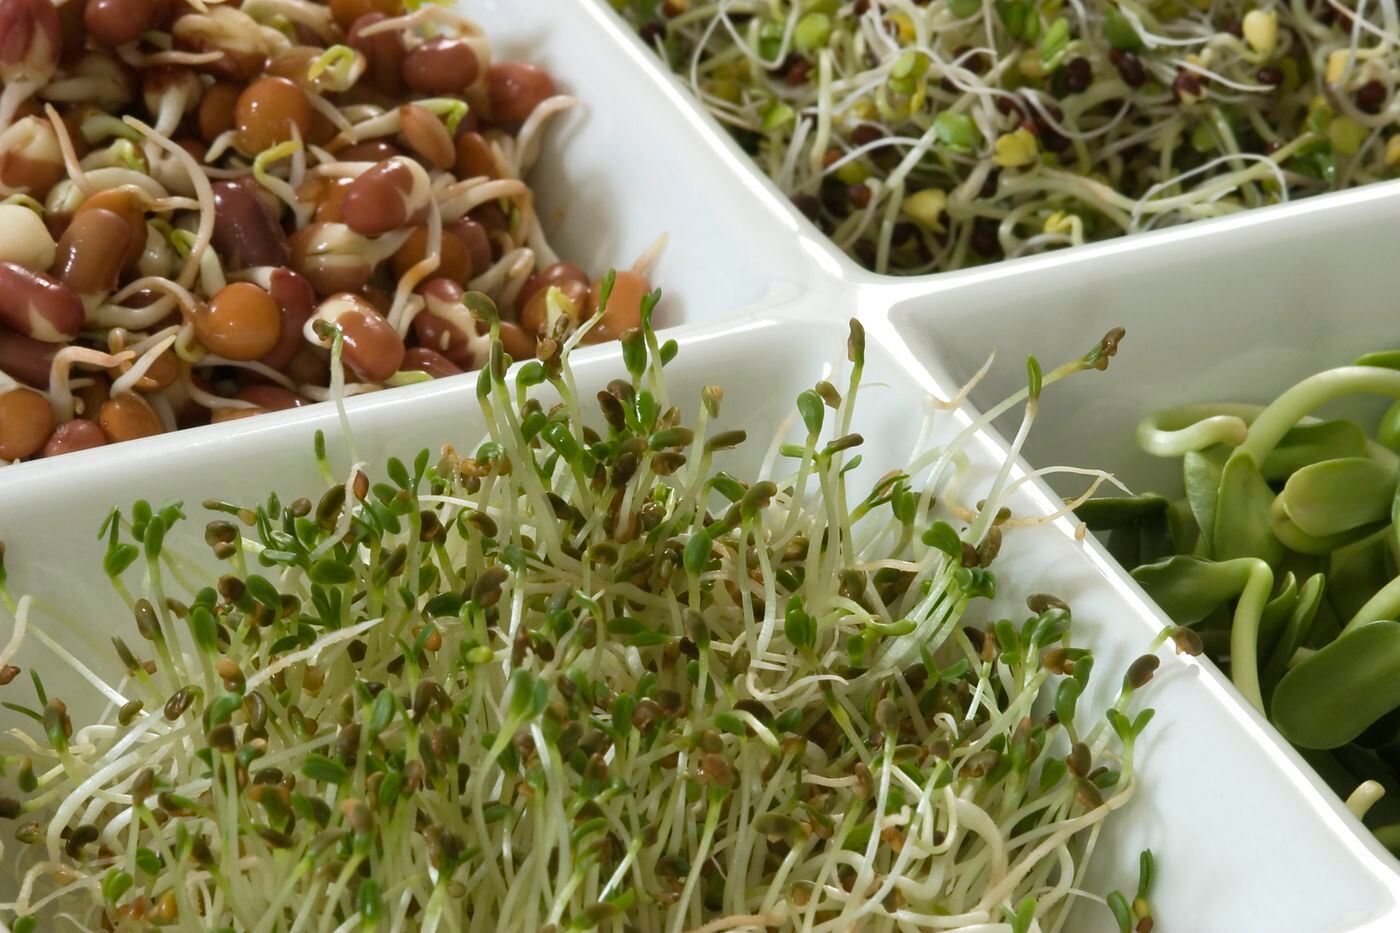 Sprouts are easy to grow at home.